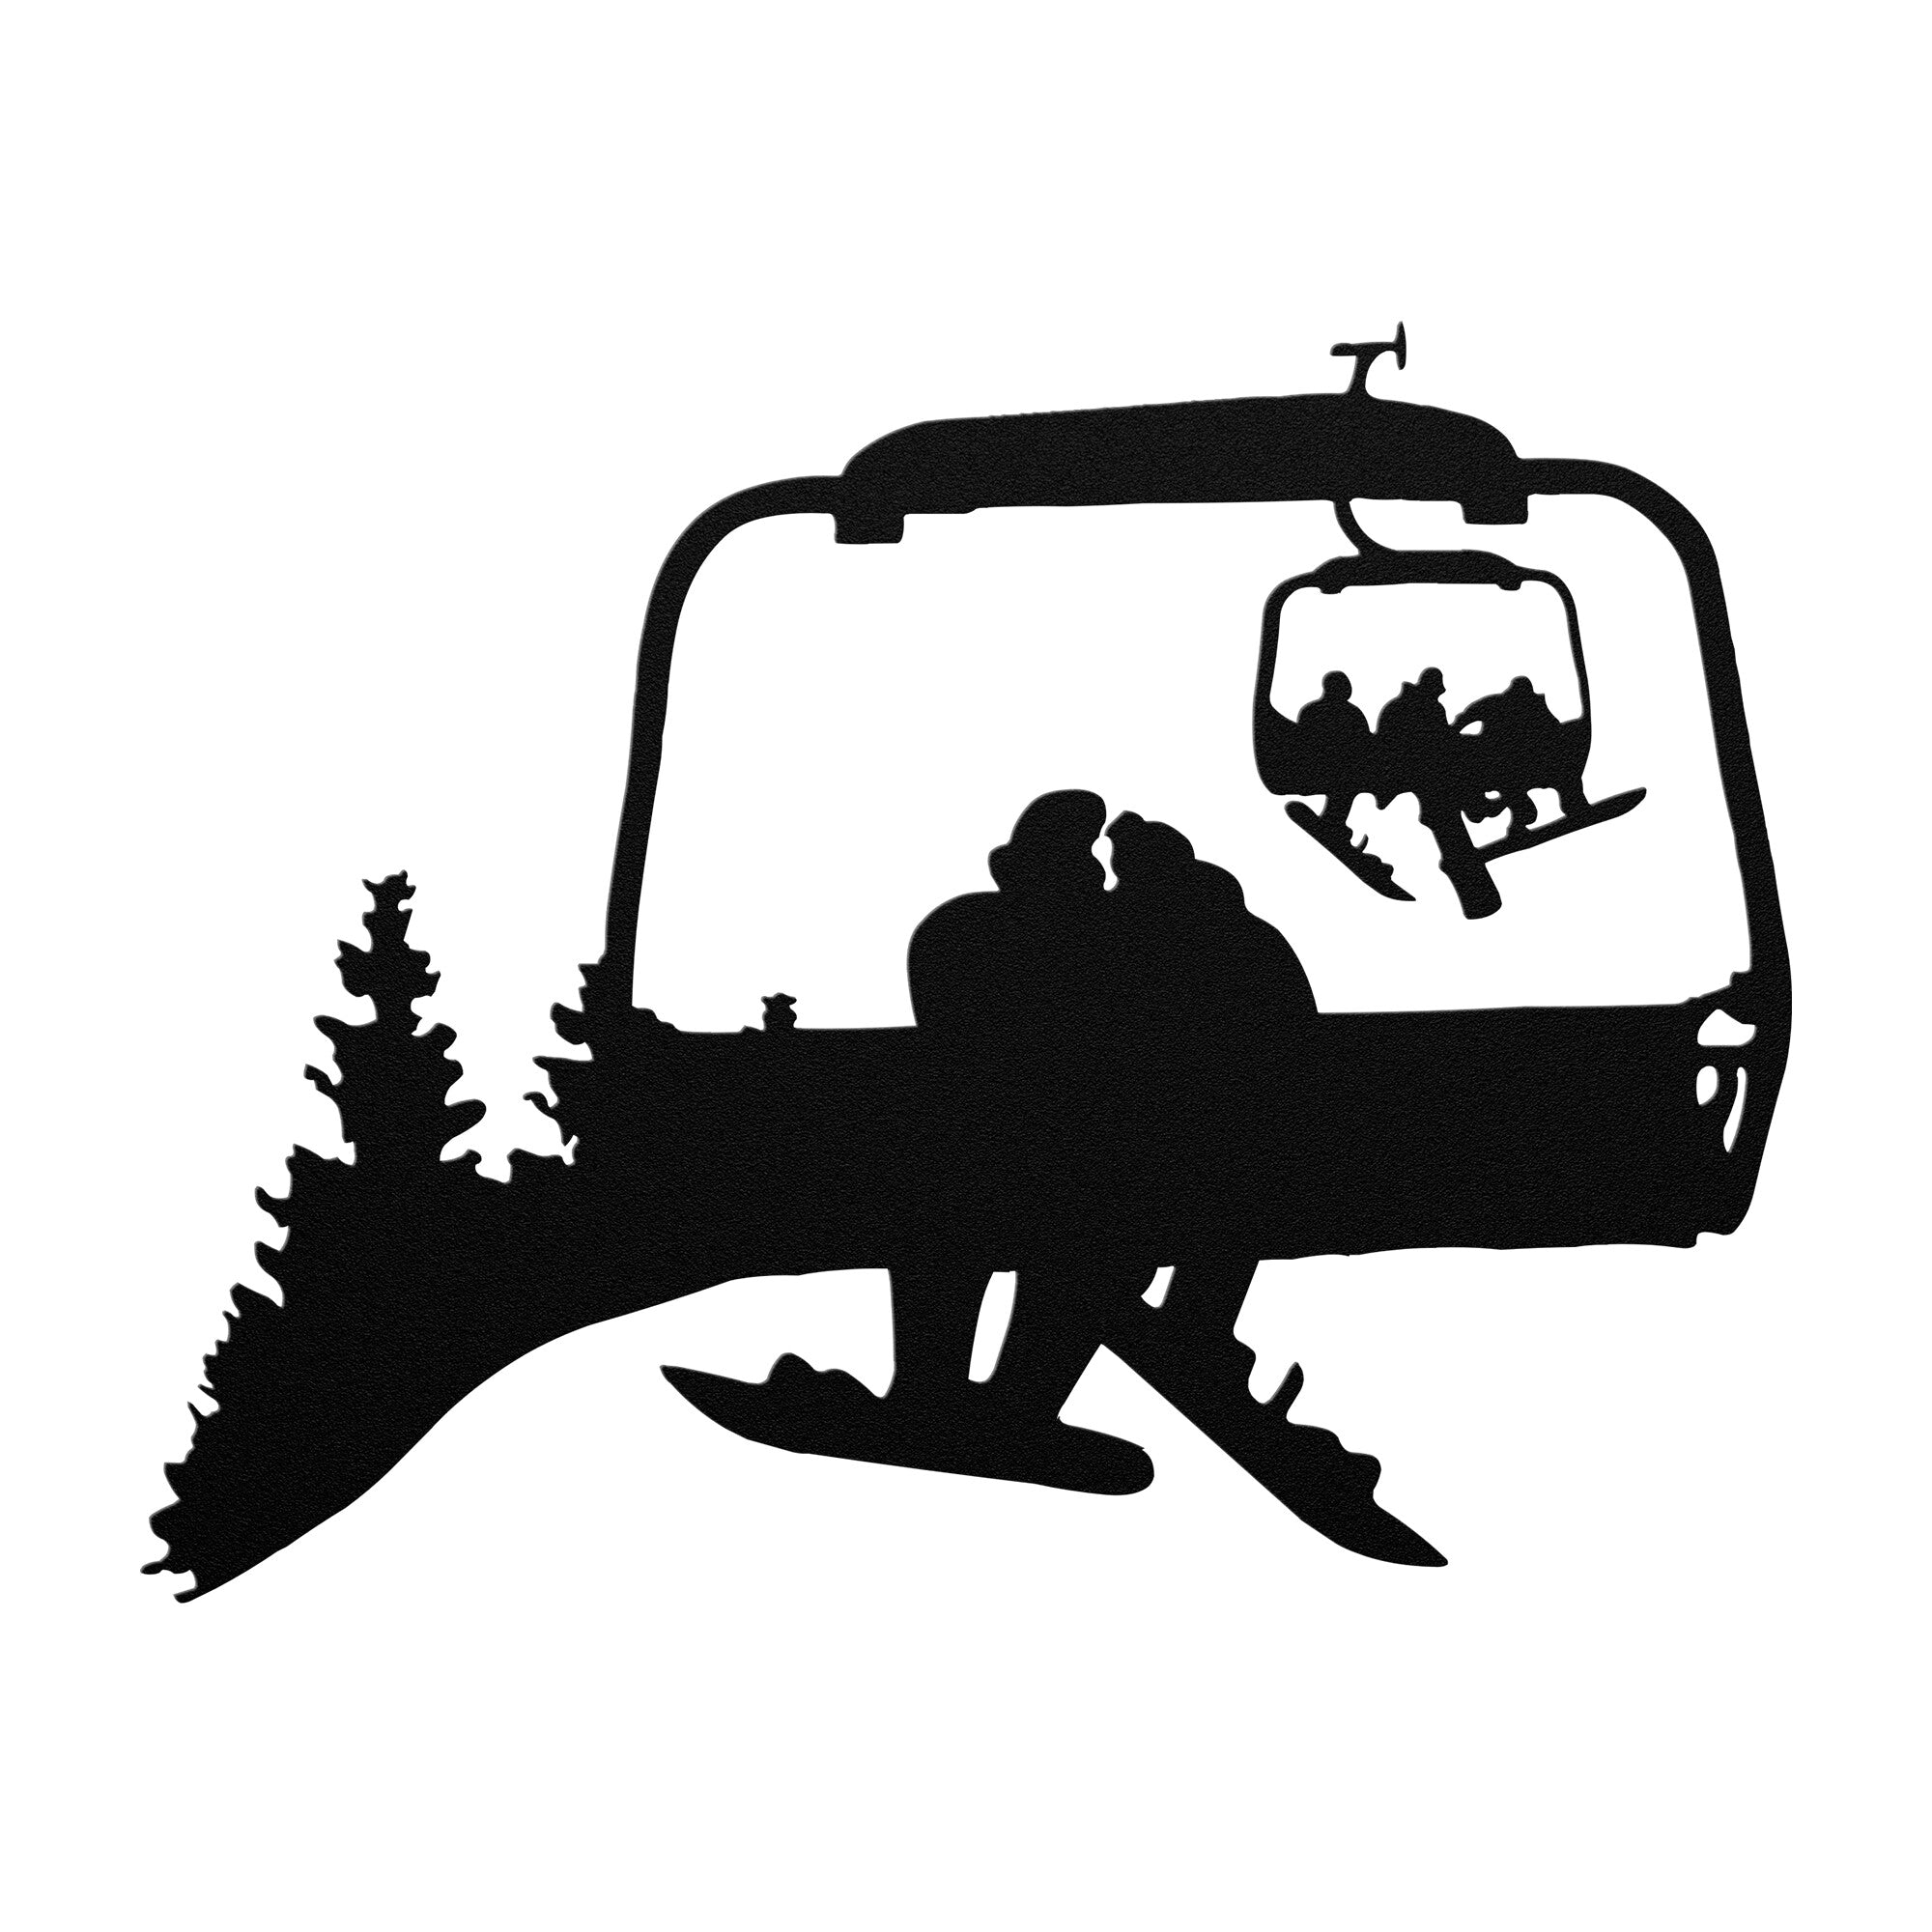 PERSONALIZED CHAIRLIFT SNOWBOARDING COUPLE METAL WALL ART (🇺🇸 MADE IN THE USA)